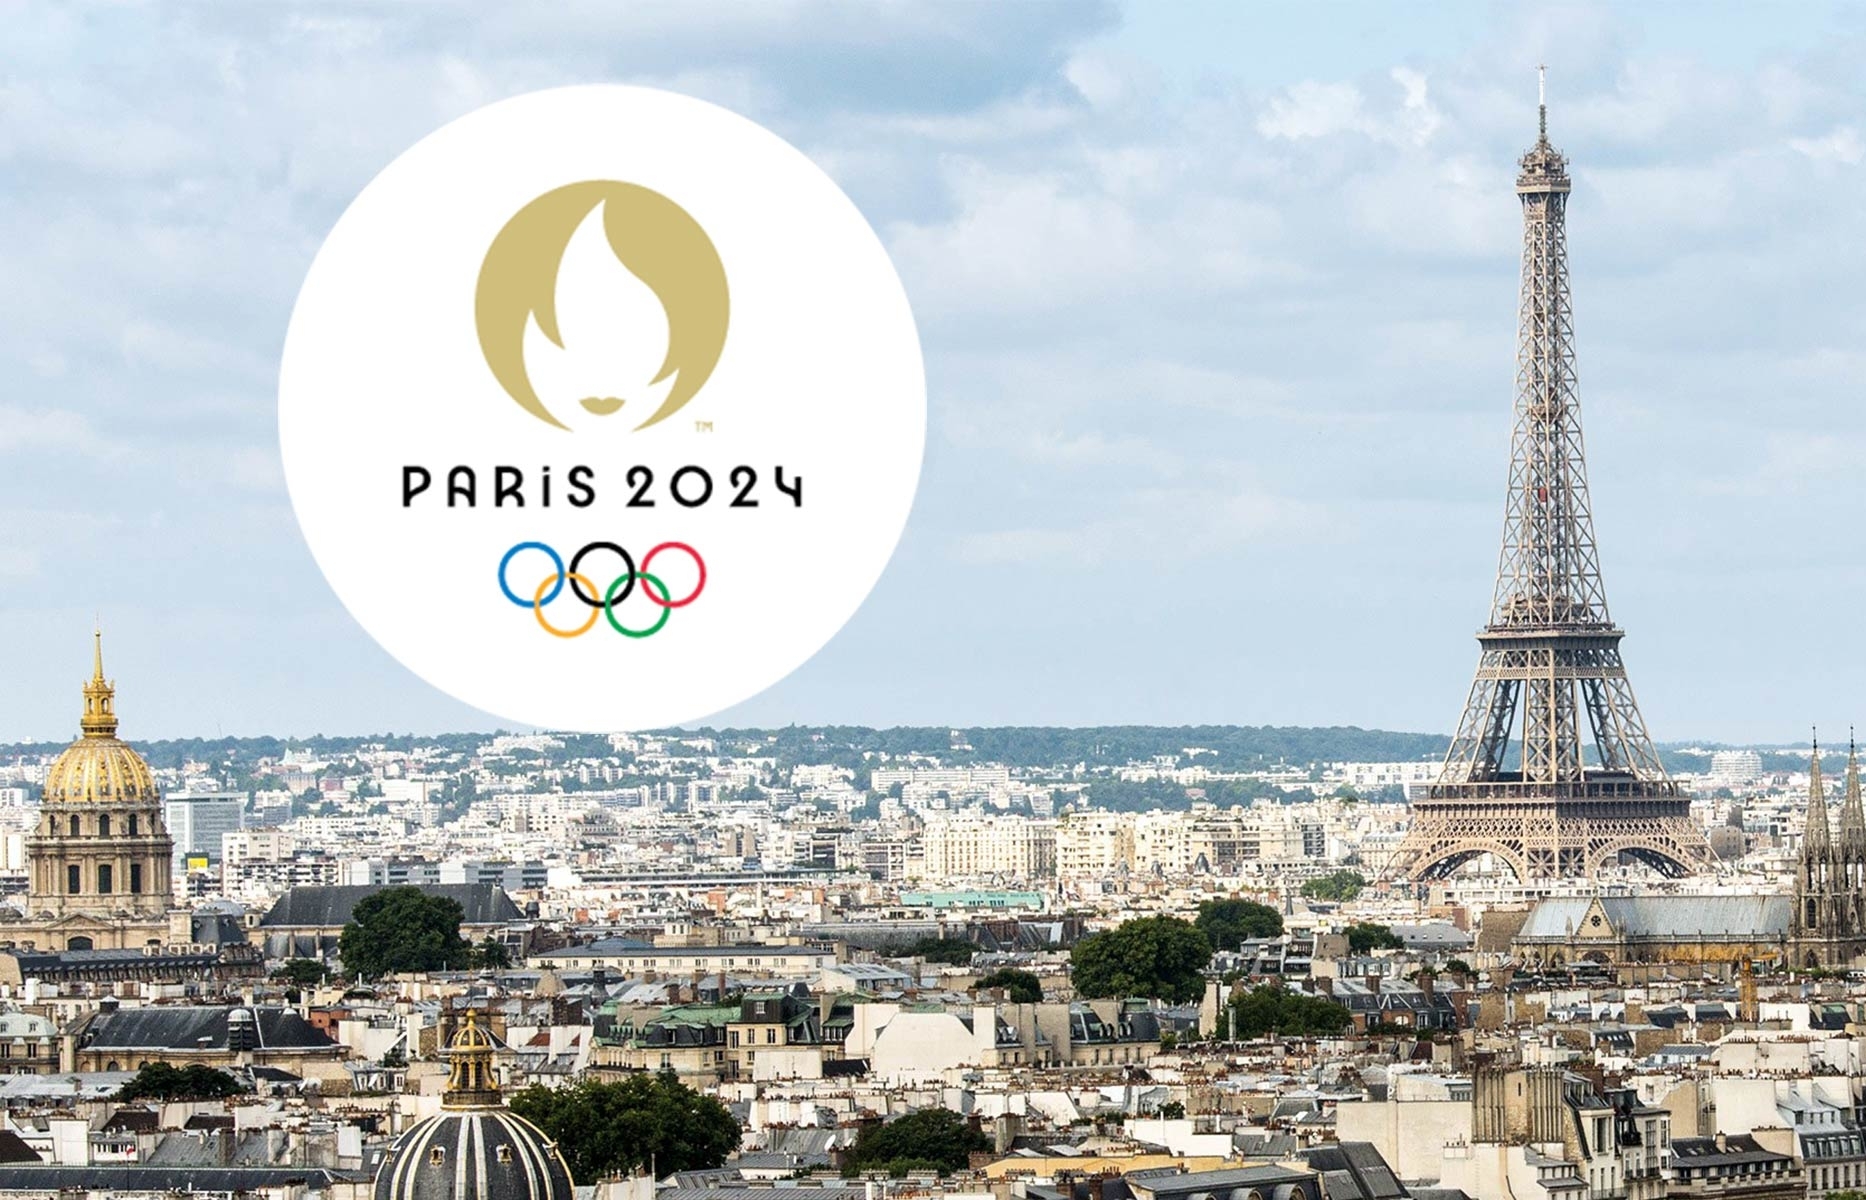 Paris 2024 - in the shadow of Tokyo but already hit by coronavirus